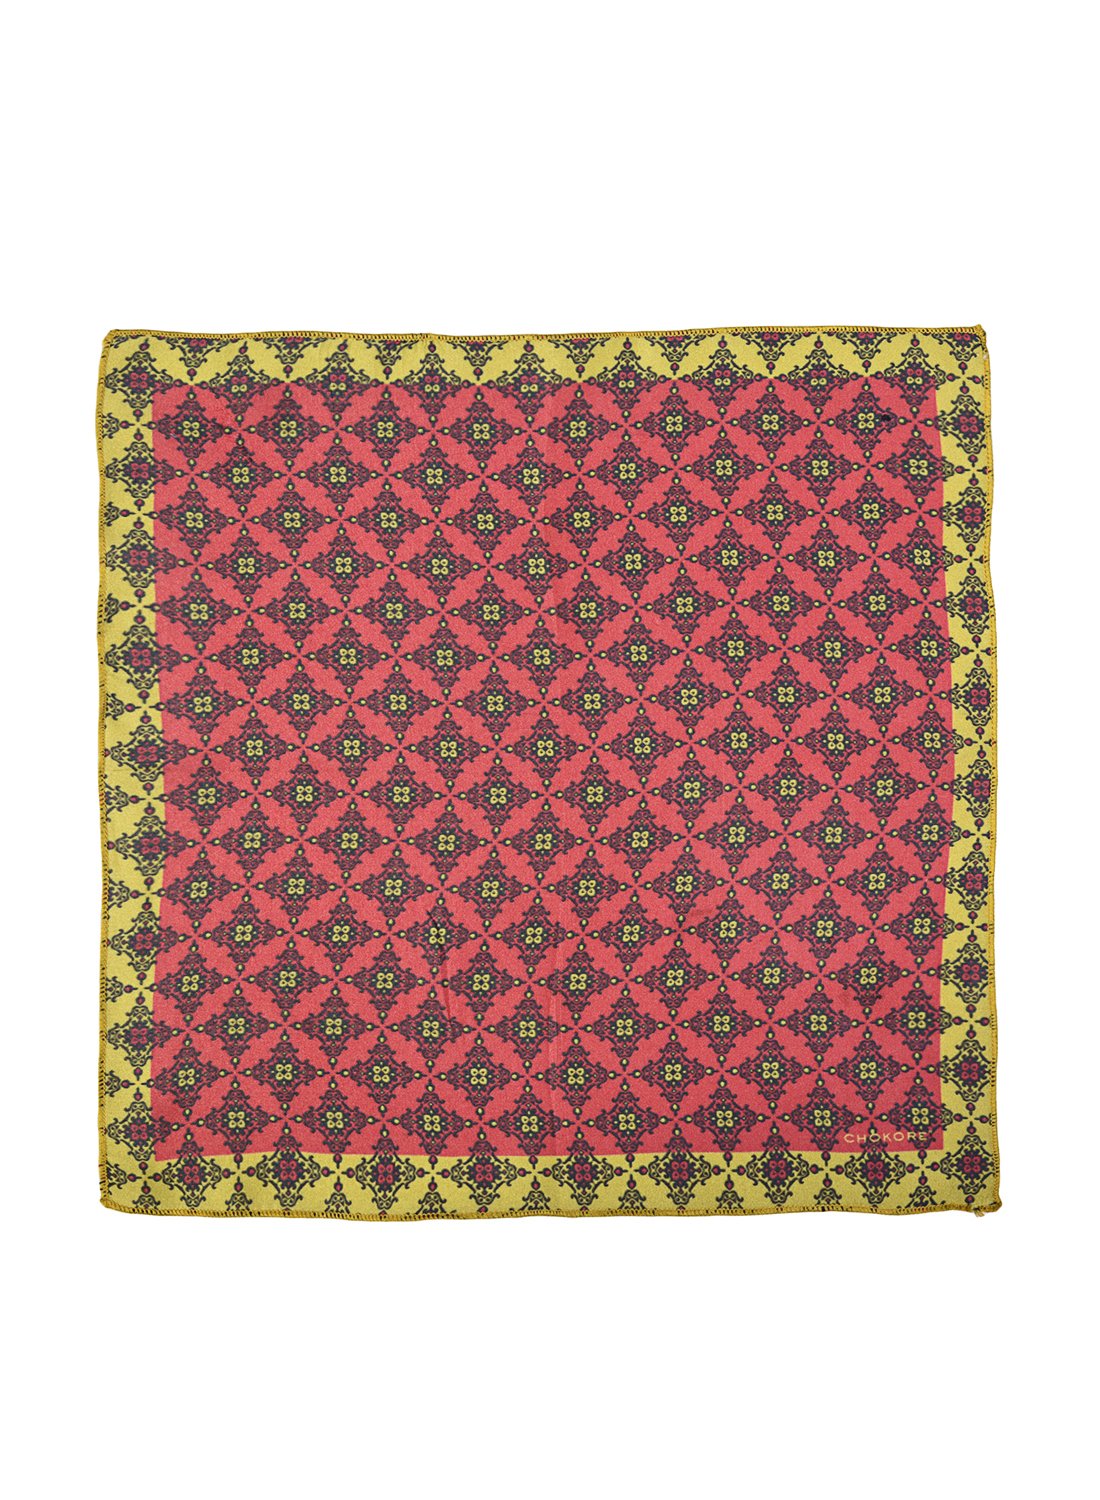 Chokore Red & Light Green Silk Pocket Square from Indian at Heart collection